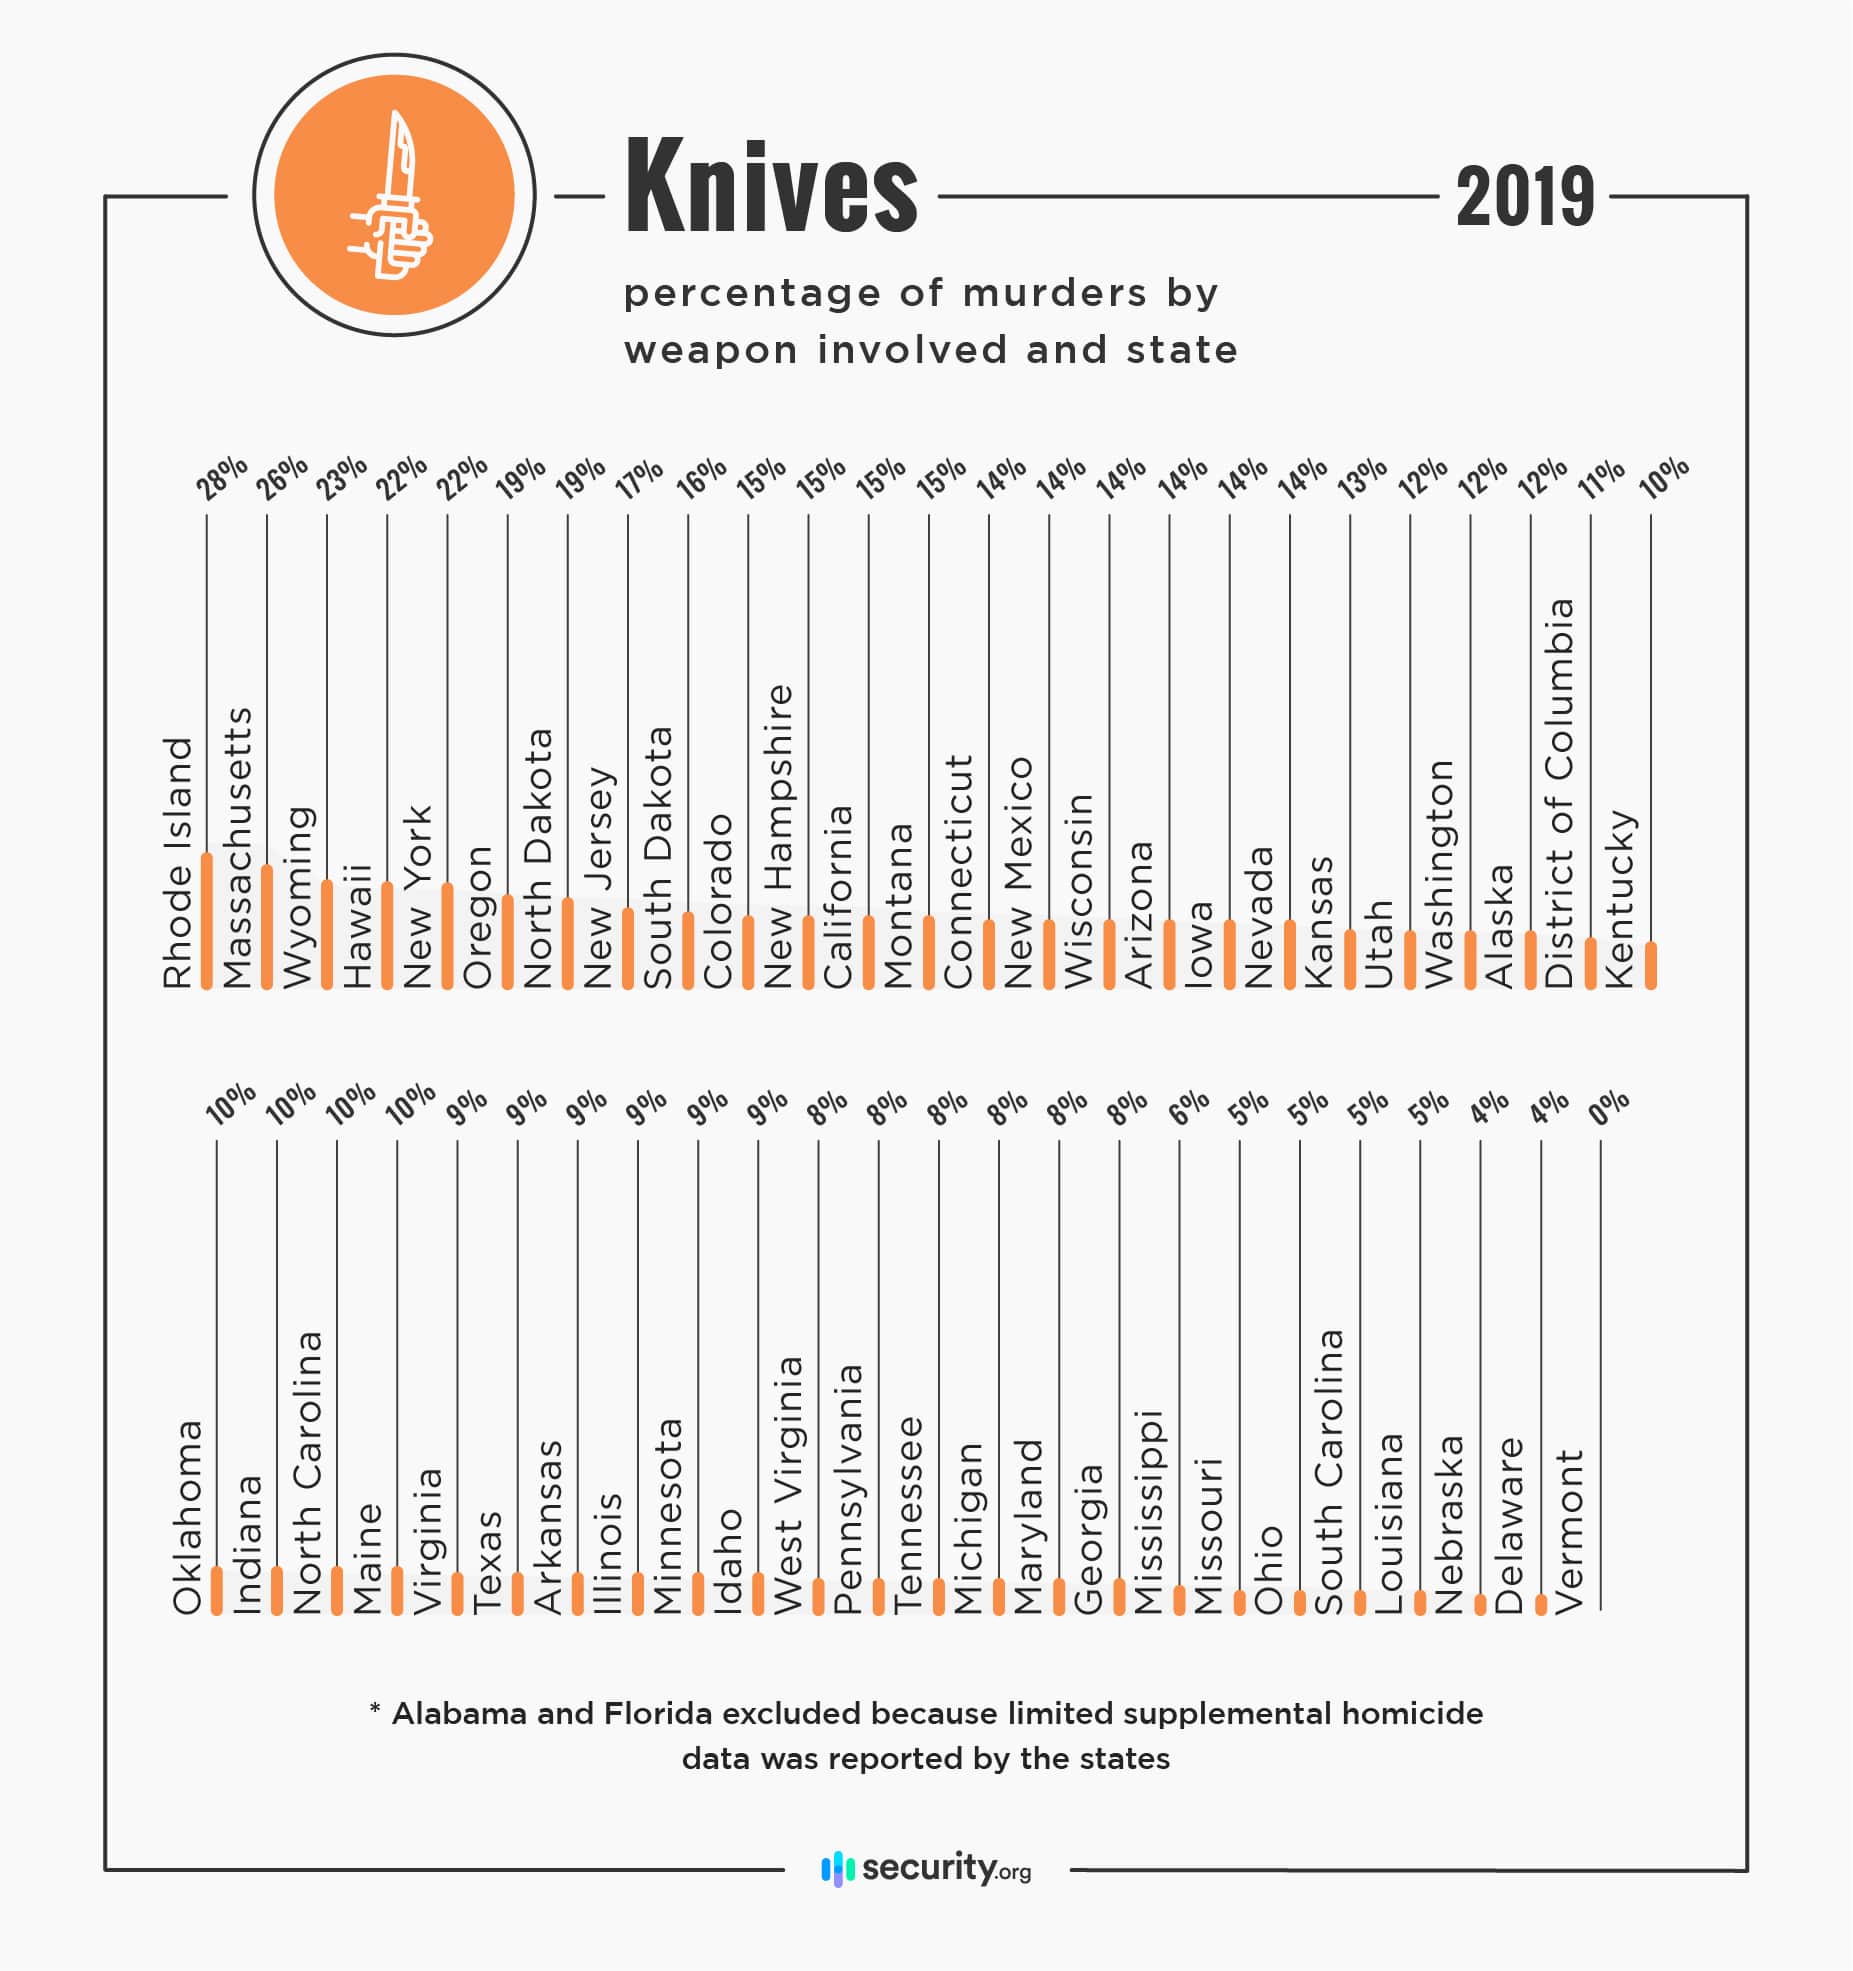 Knives - percentage of murders by weapon involved and state in 2019